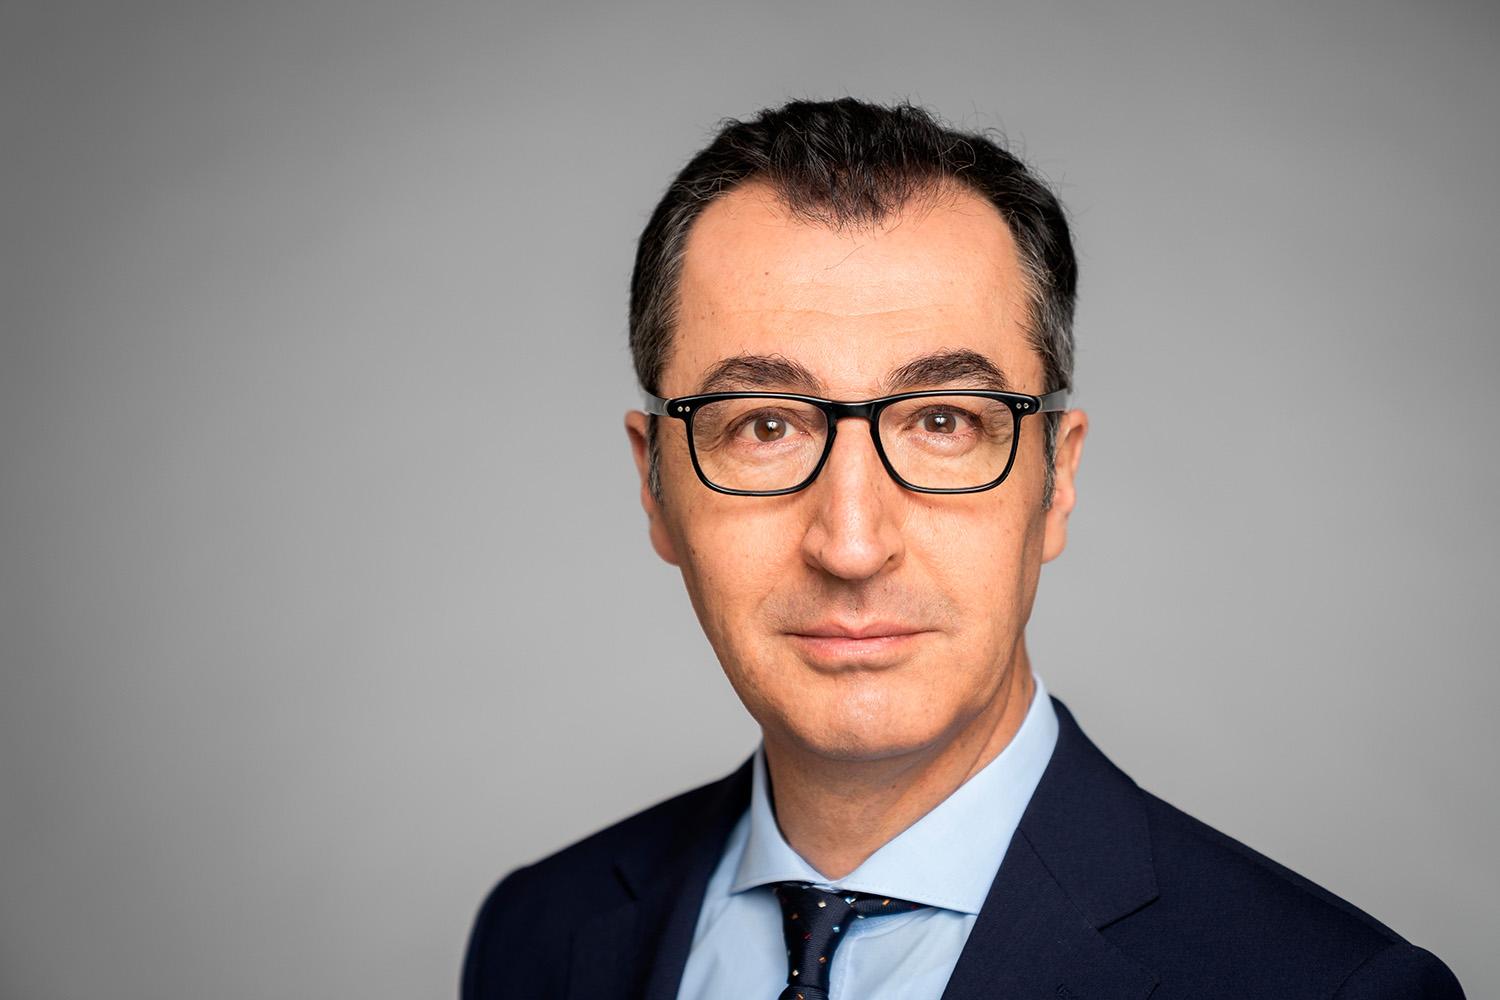 Cem Özdemir is Federal Minster of Food and Agriculture